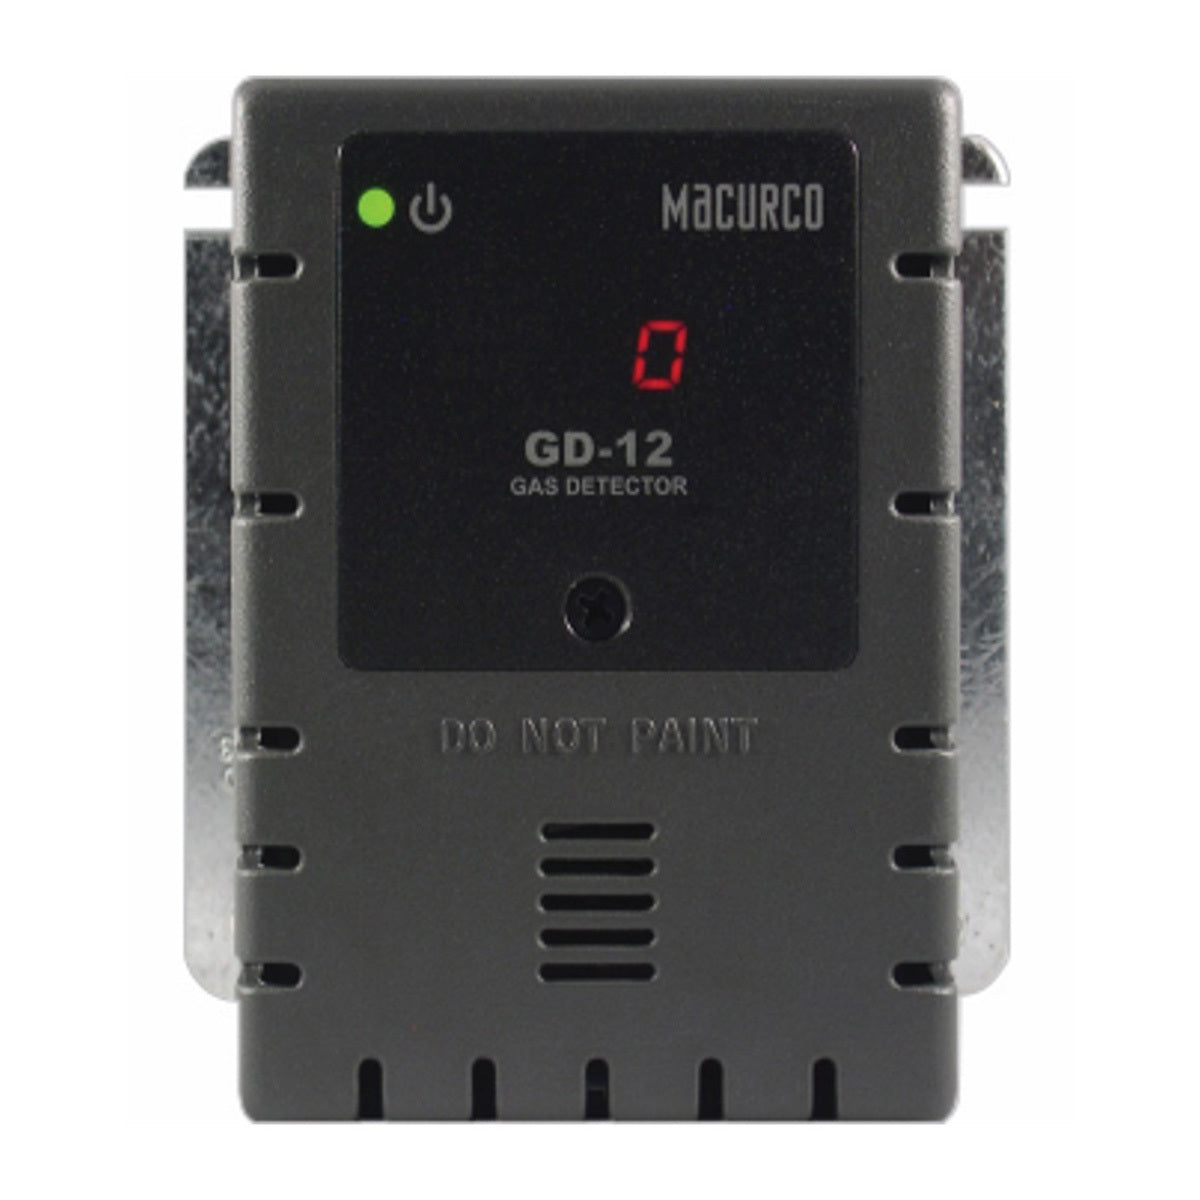 Macurco™ Gas Detection GD-12 Fixed Combustible Gases/Hydrogen, Propane, Methane Detector-eSafety Supplies, Inc